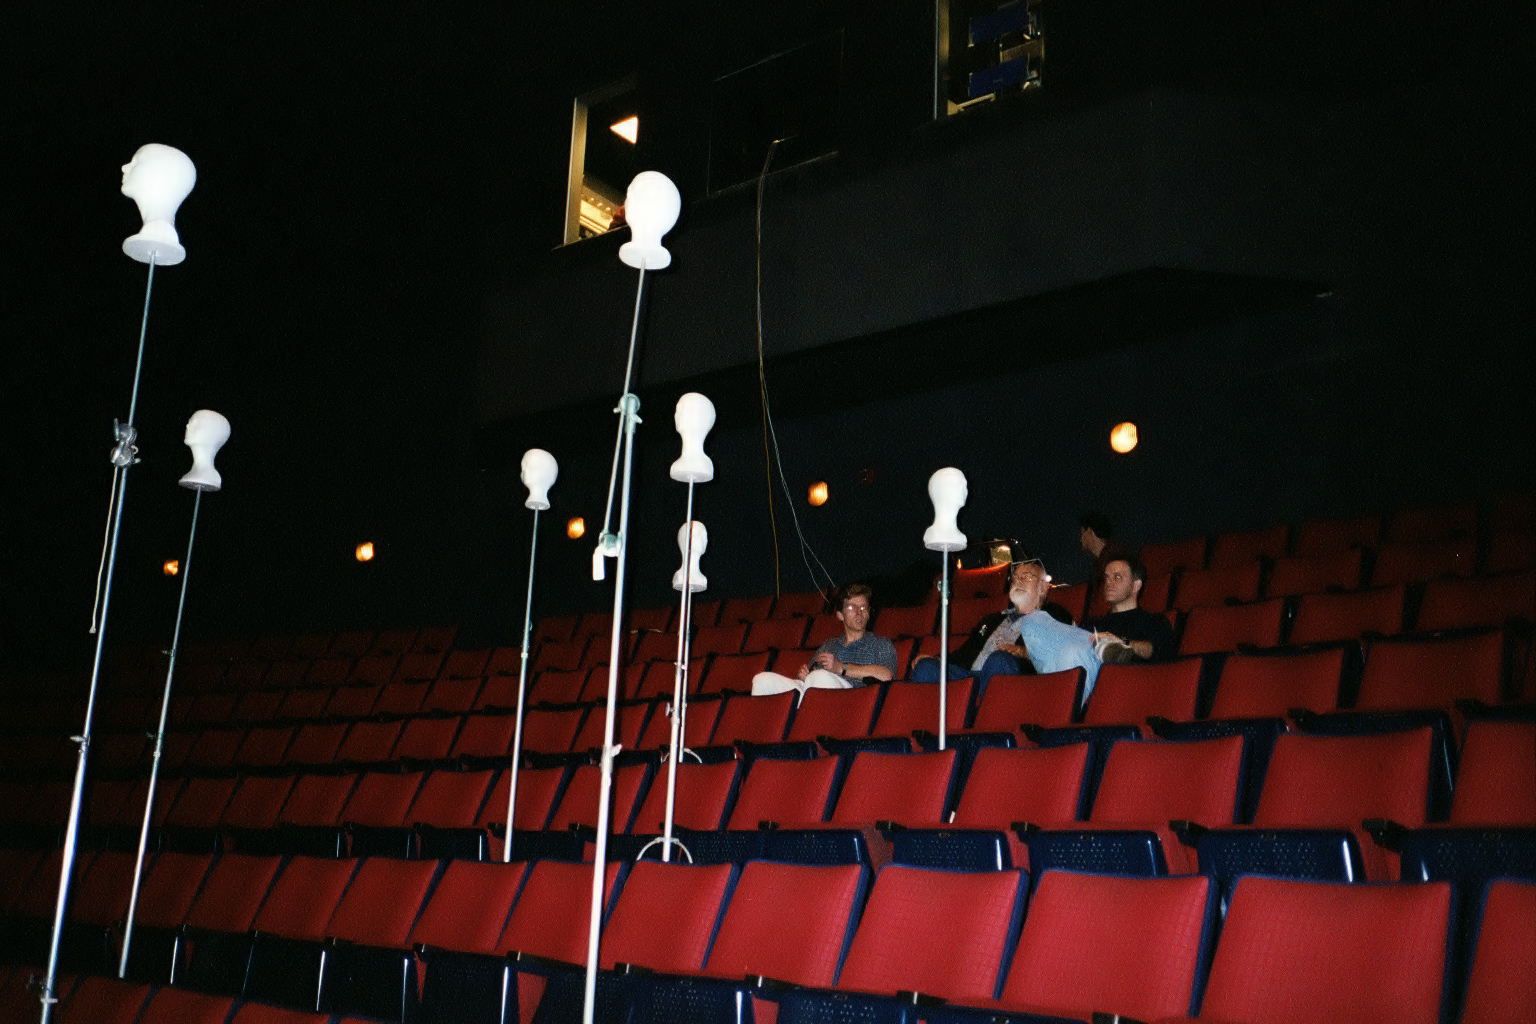 With Peter Anderson A.S.C. in production on Sesame Street 4D. The styrofoam heads were used in the stadium seating to get an idea what the audience would see.